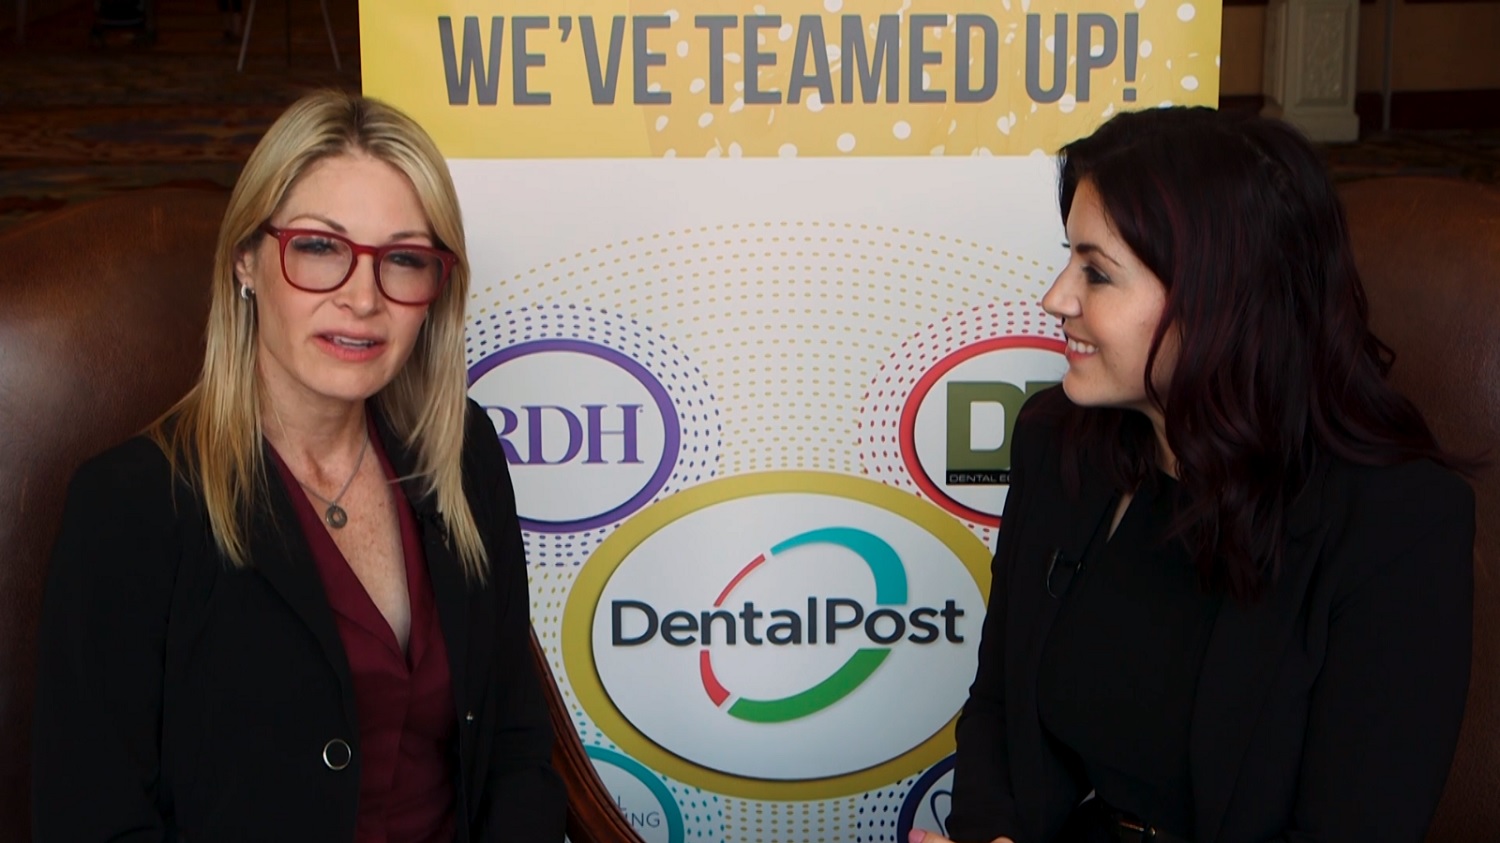 DentalPost CEO in collaboration with RDH